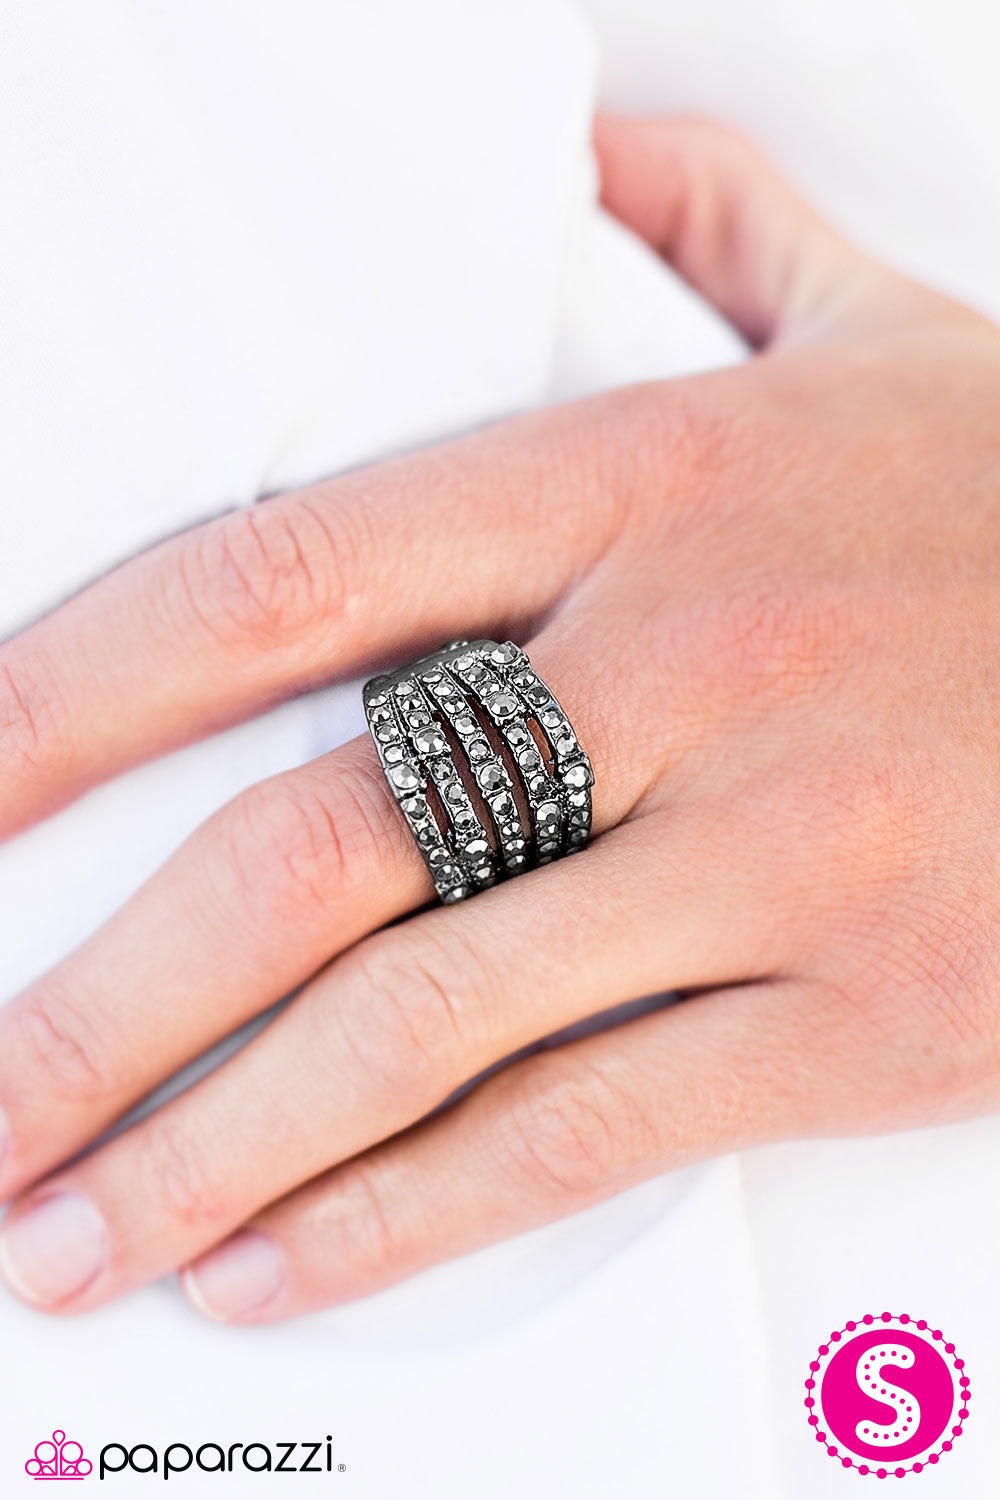 Sparkle Like You Mean It! - Paparazzi ring